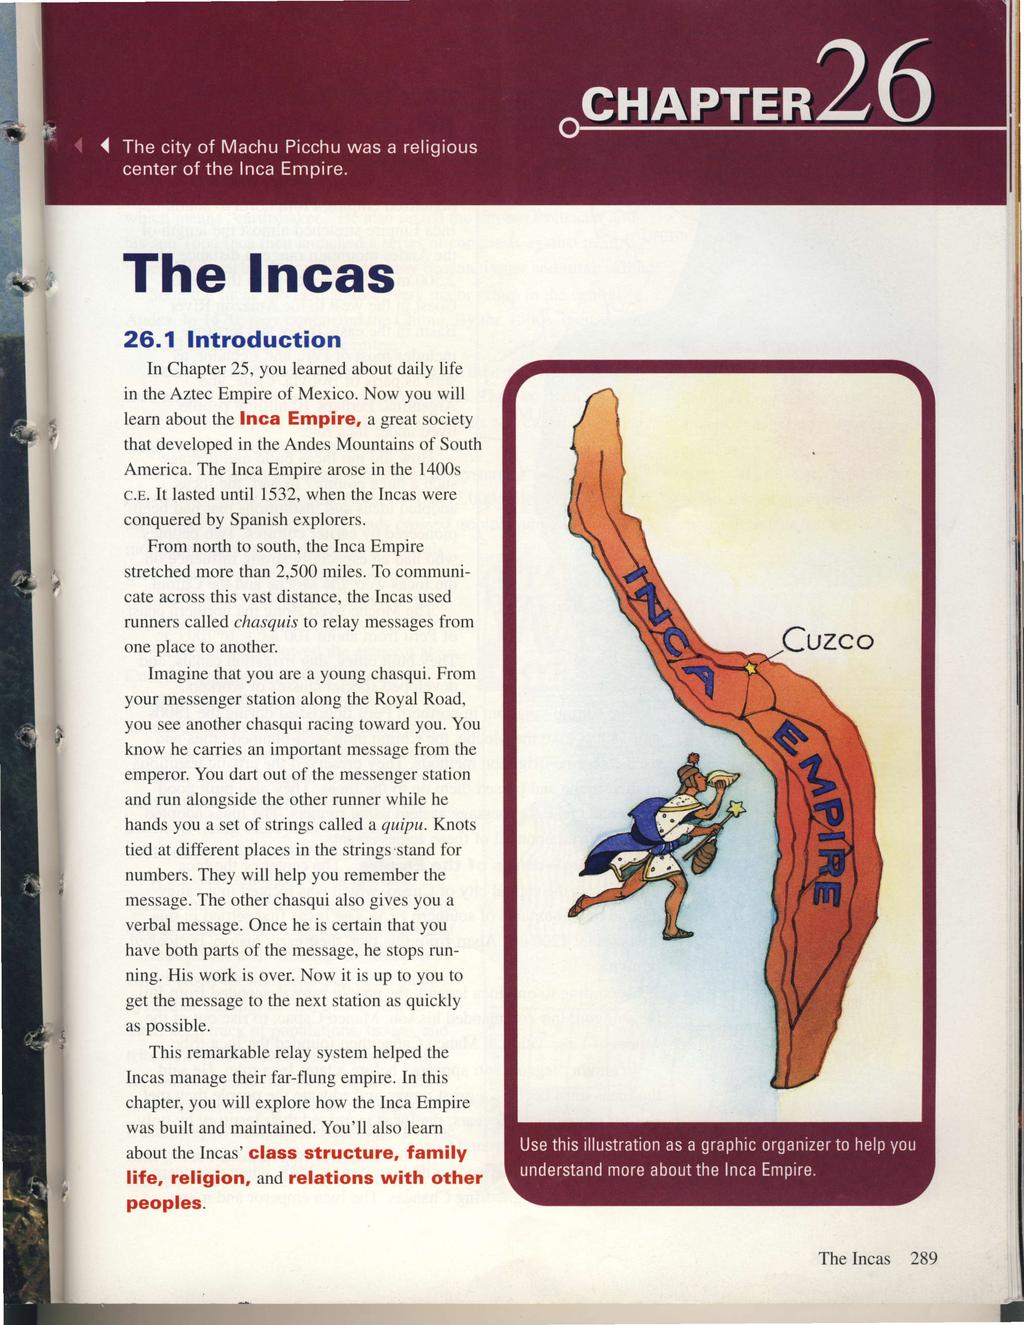 t The Incas 26.1 Introduction In Chapter 25, you learned about daily life in the Aztec Empire of Mexico.